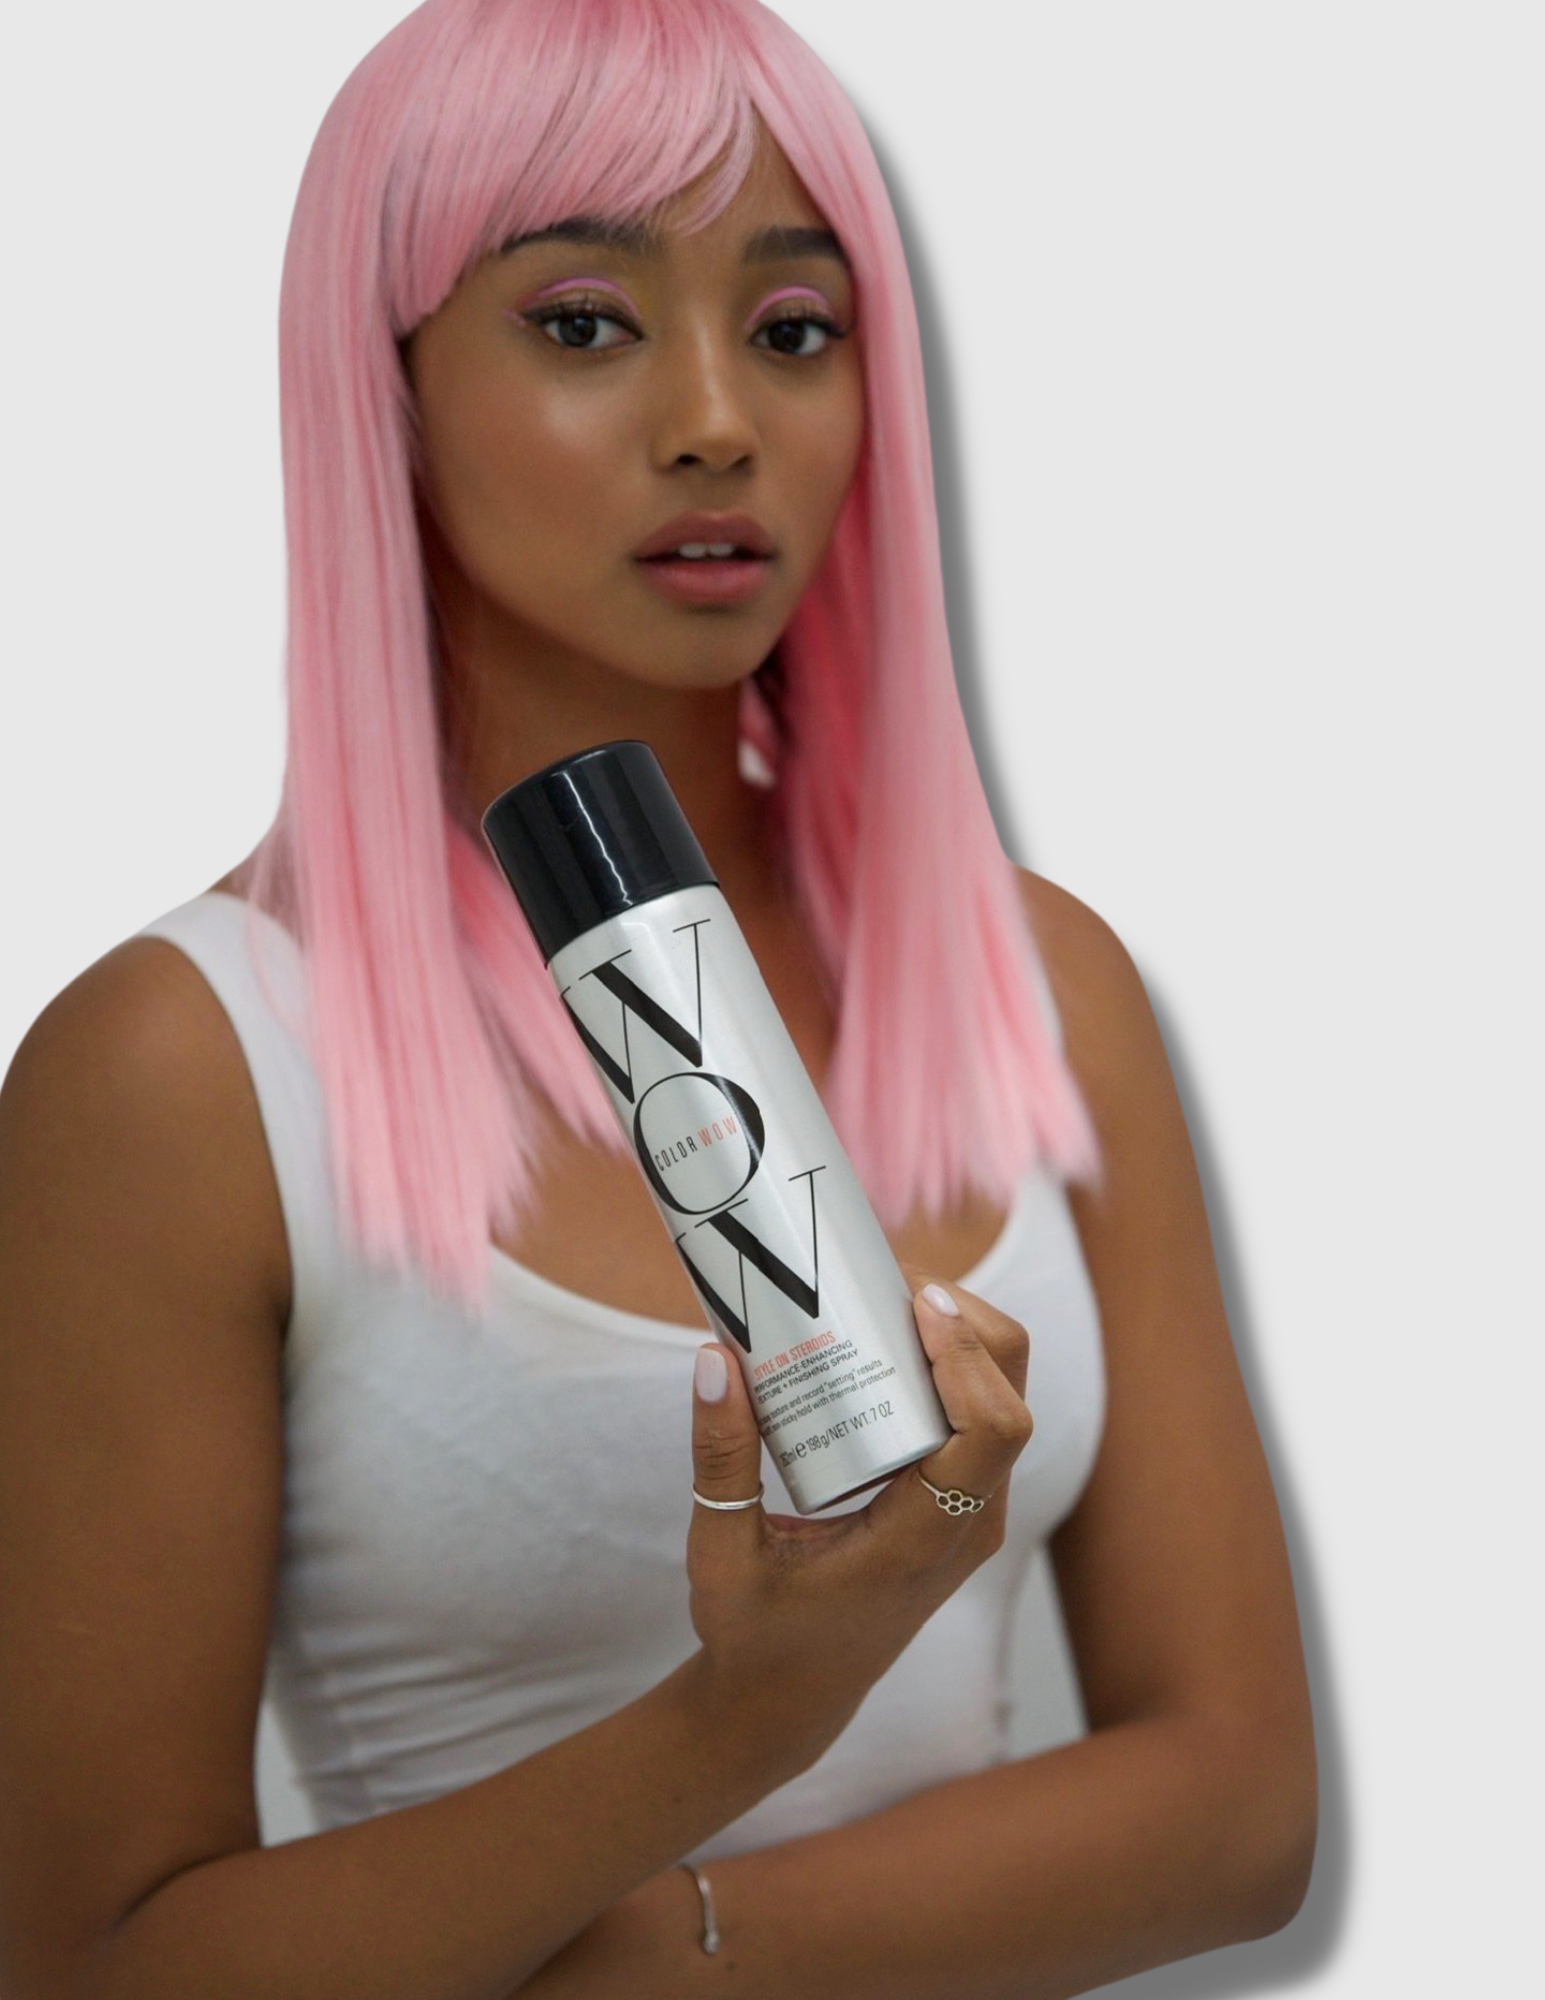 Style on Steroids texture spray is great for giving hair that